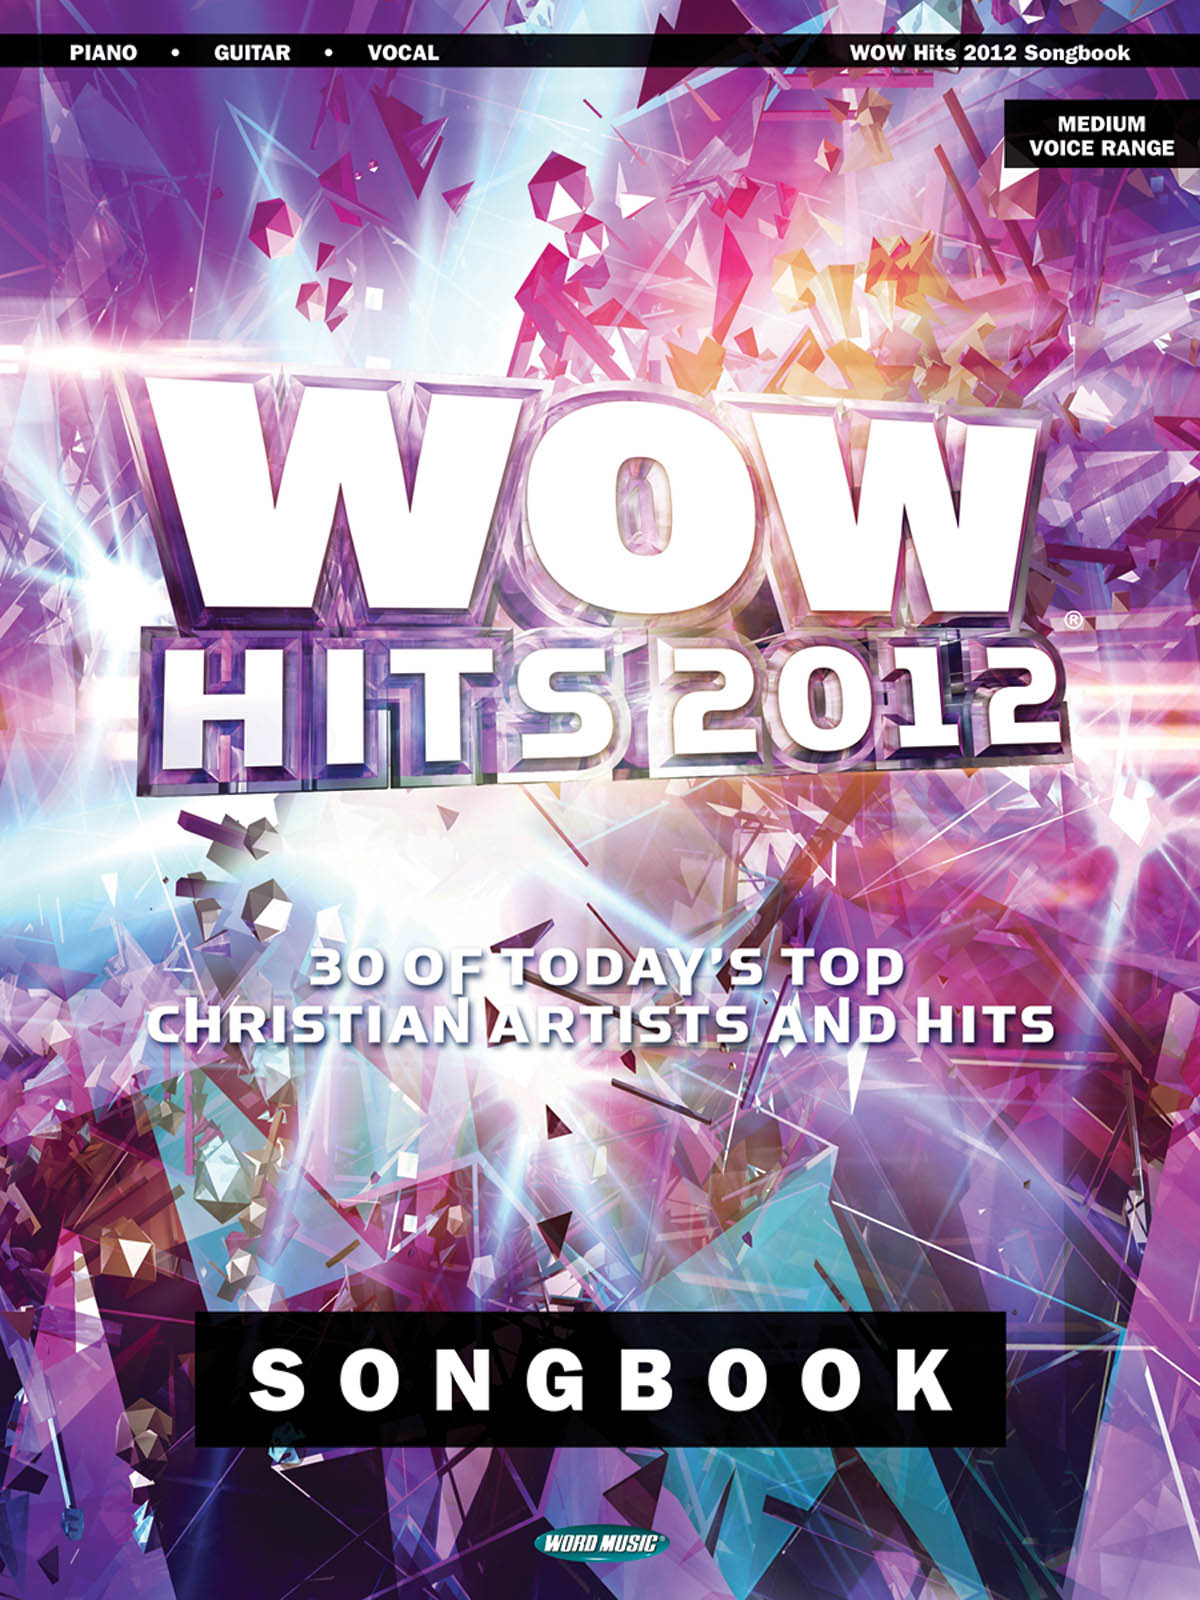 WOW Hits 2012 Songbook(3 of Today's Top Christian Artists and Hits)